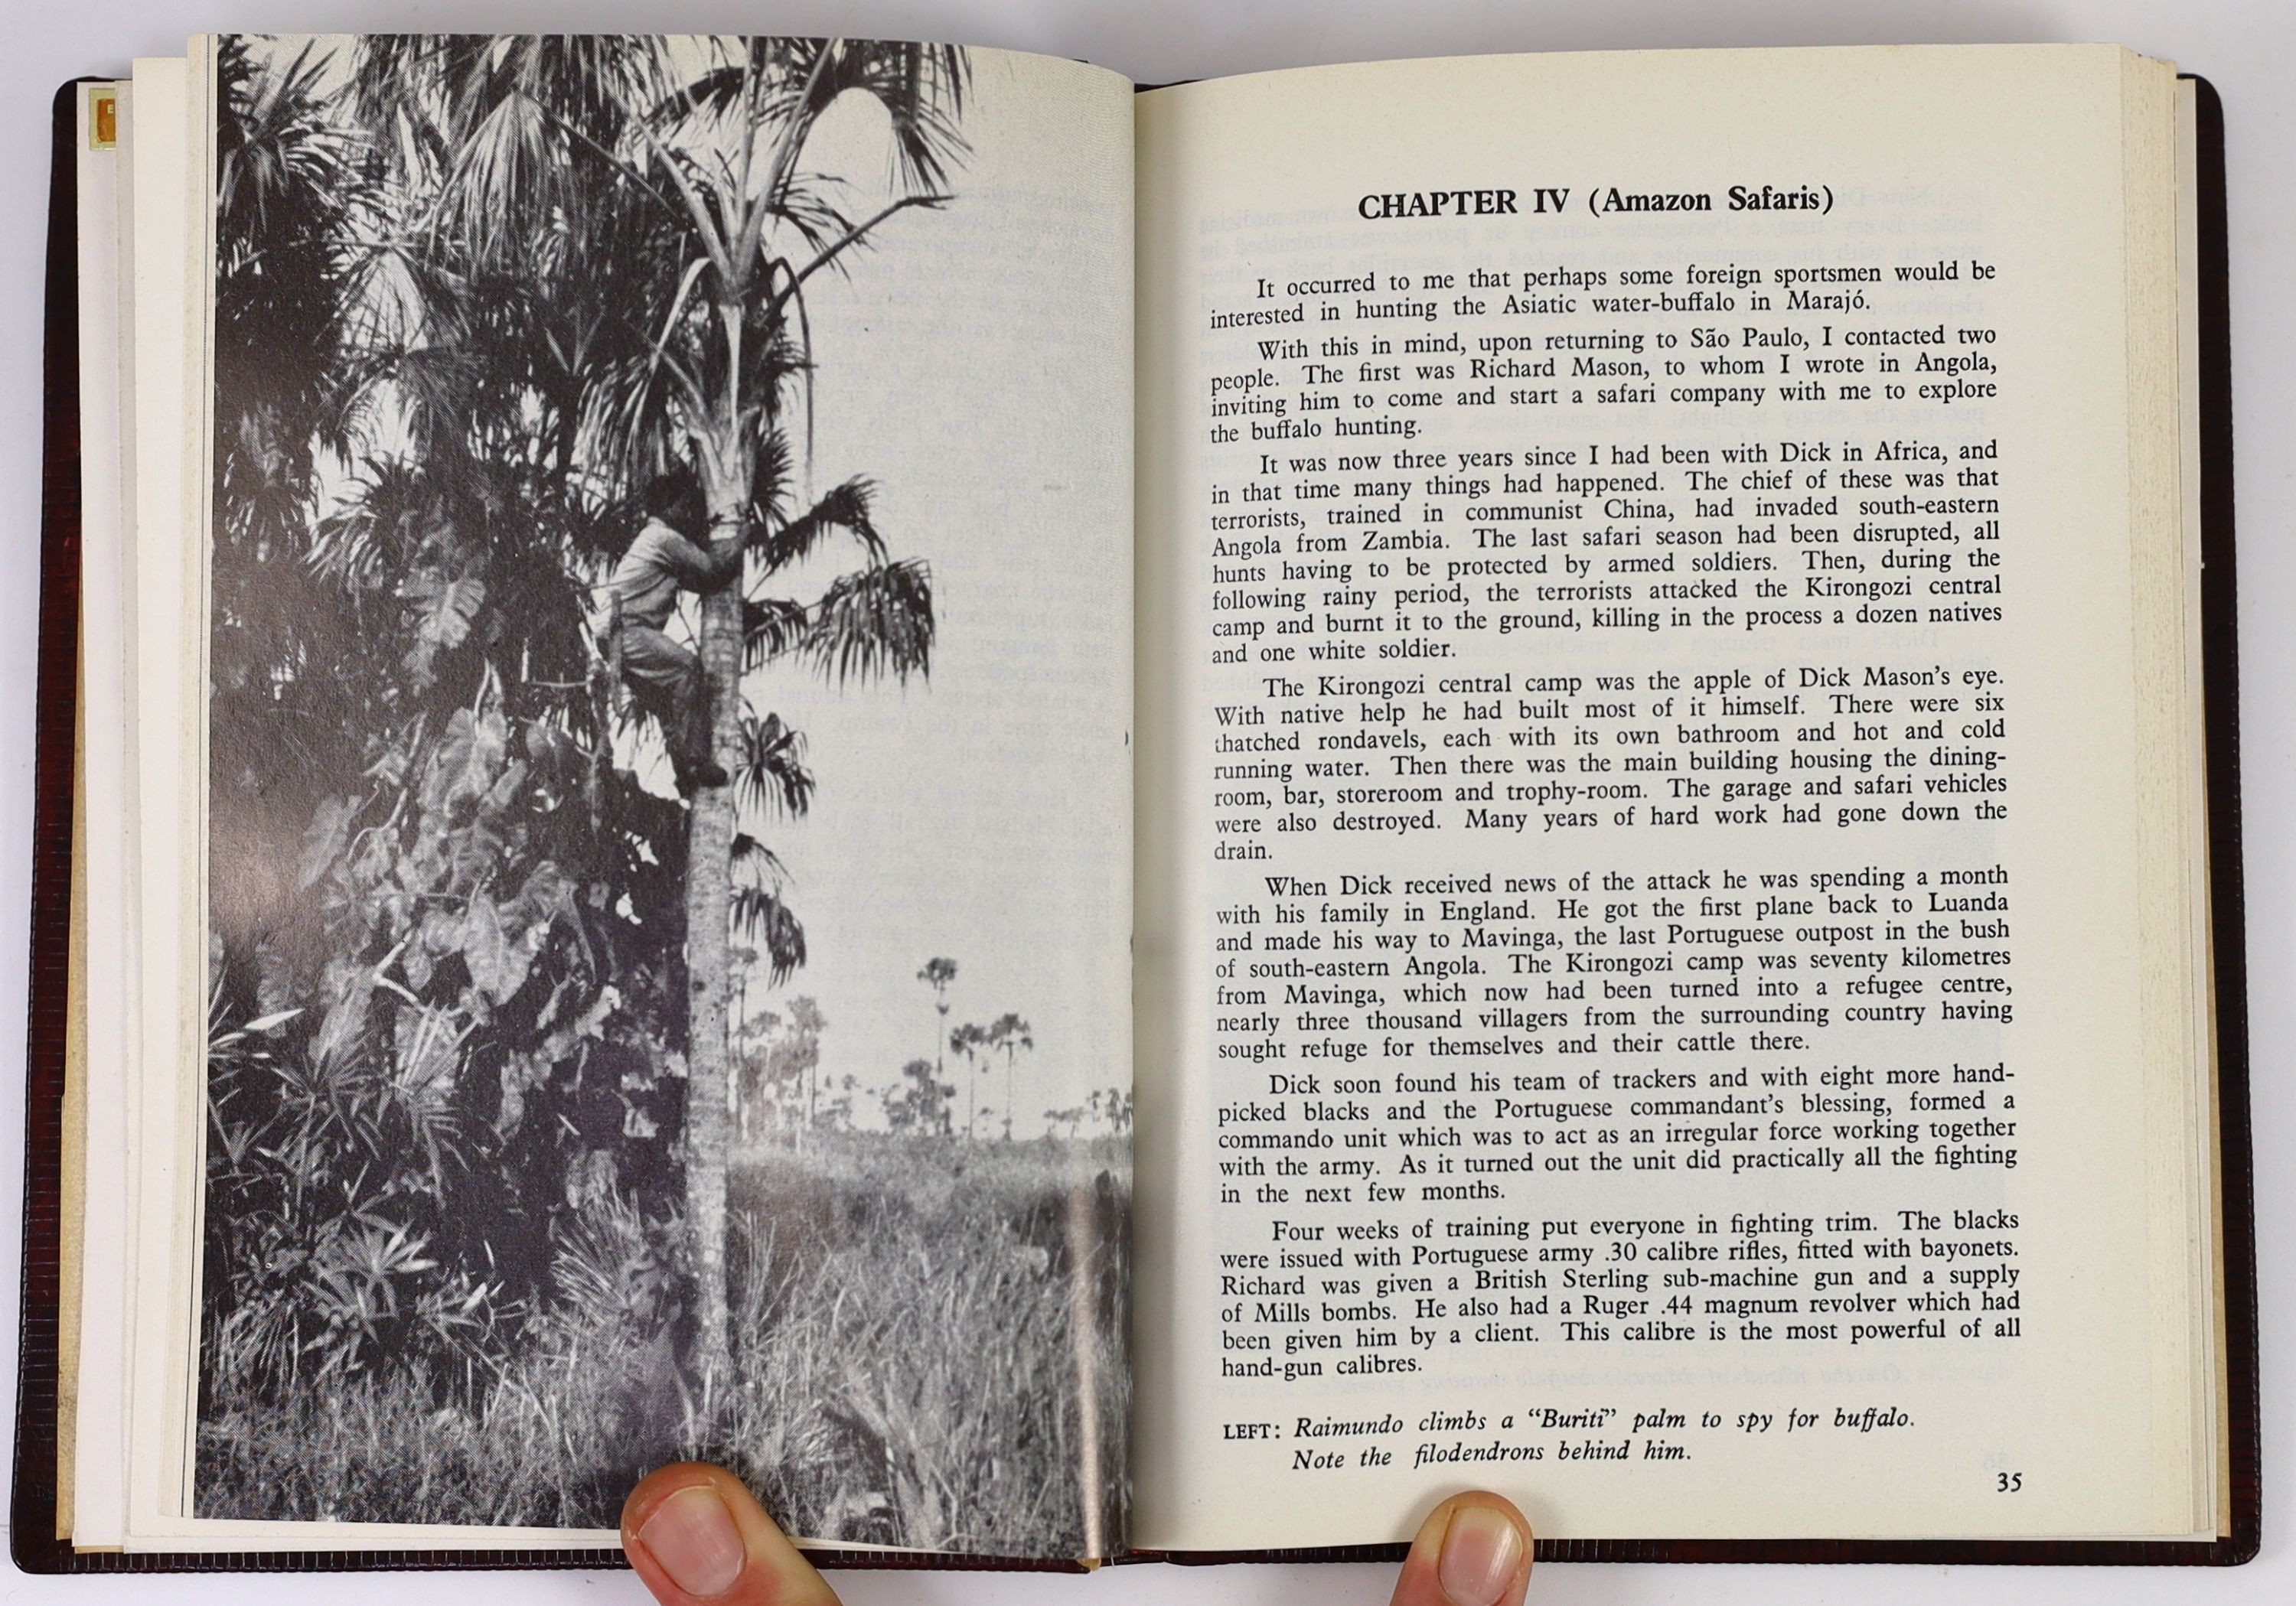 Almeida, Antonio A. Jaguar Hunting in the Mato Grosso. Stanwill Press, 1976. Full dark brown leather binding, gilt, with the original stiff paper wrapper bound in. * With a presentation inscription on the second free end